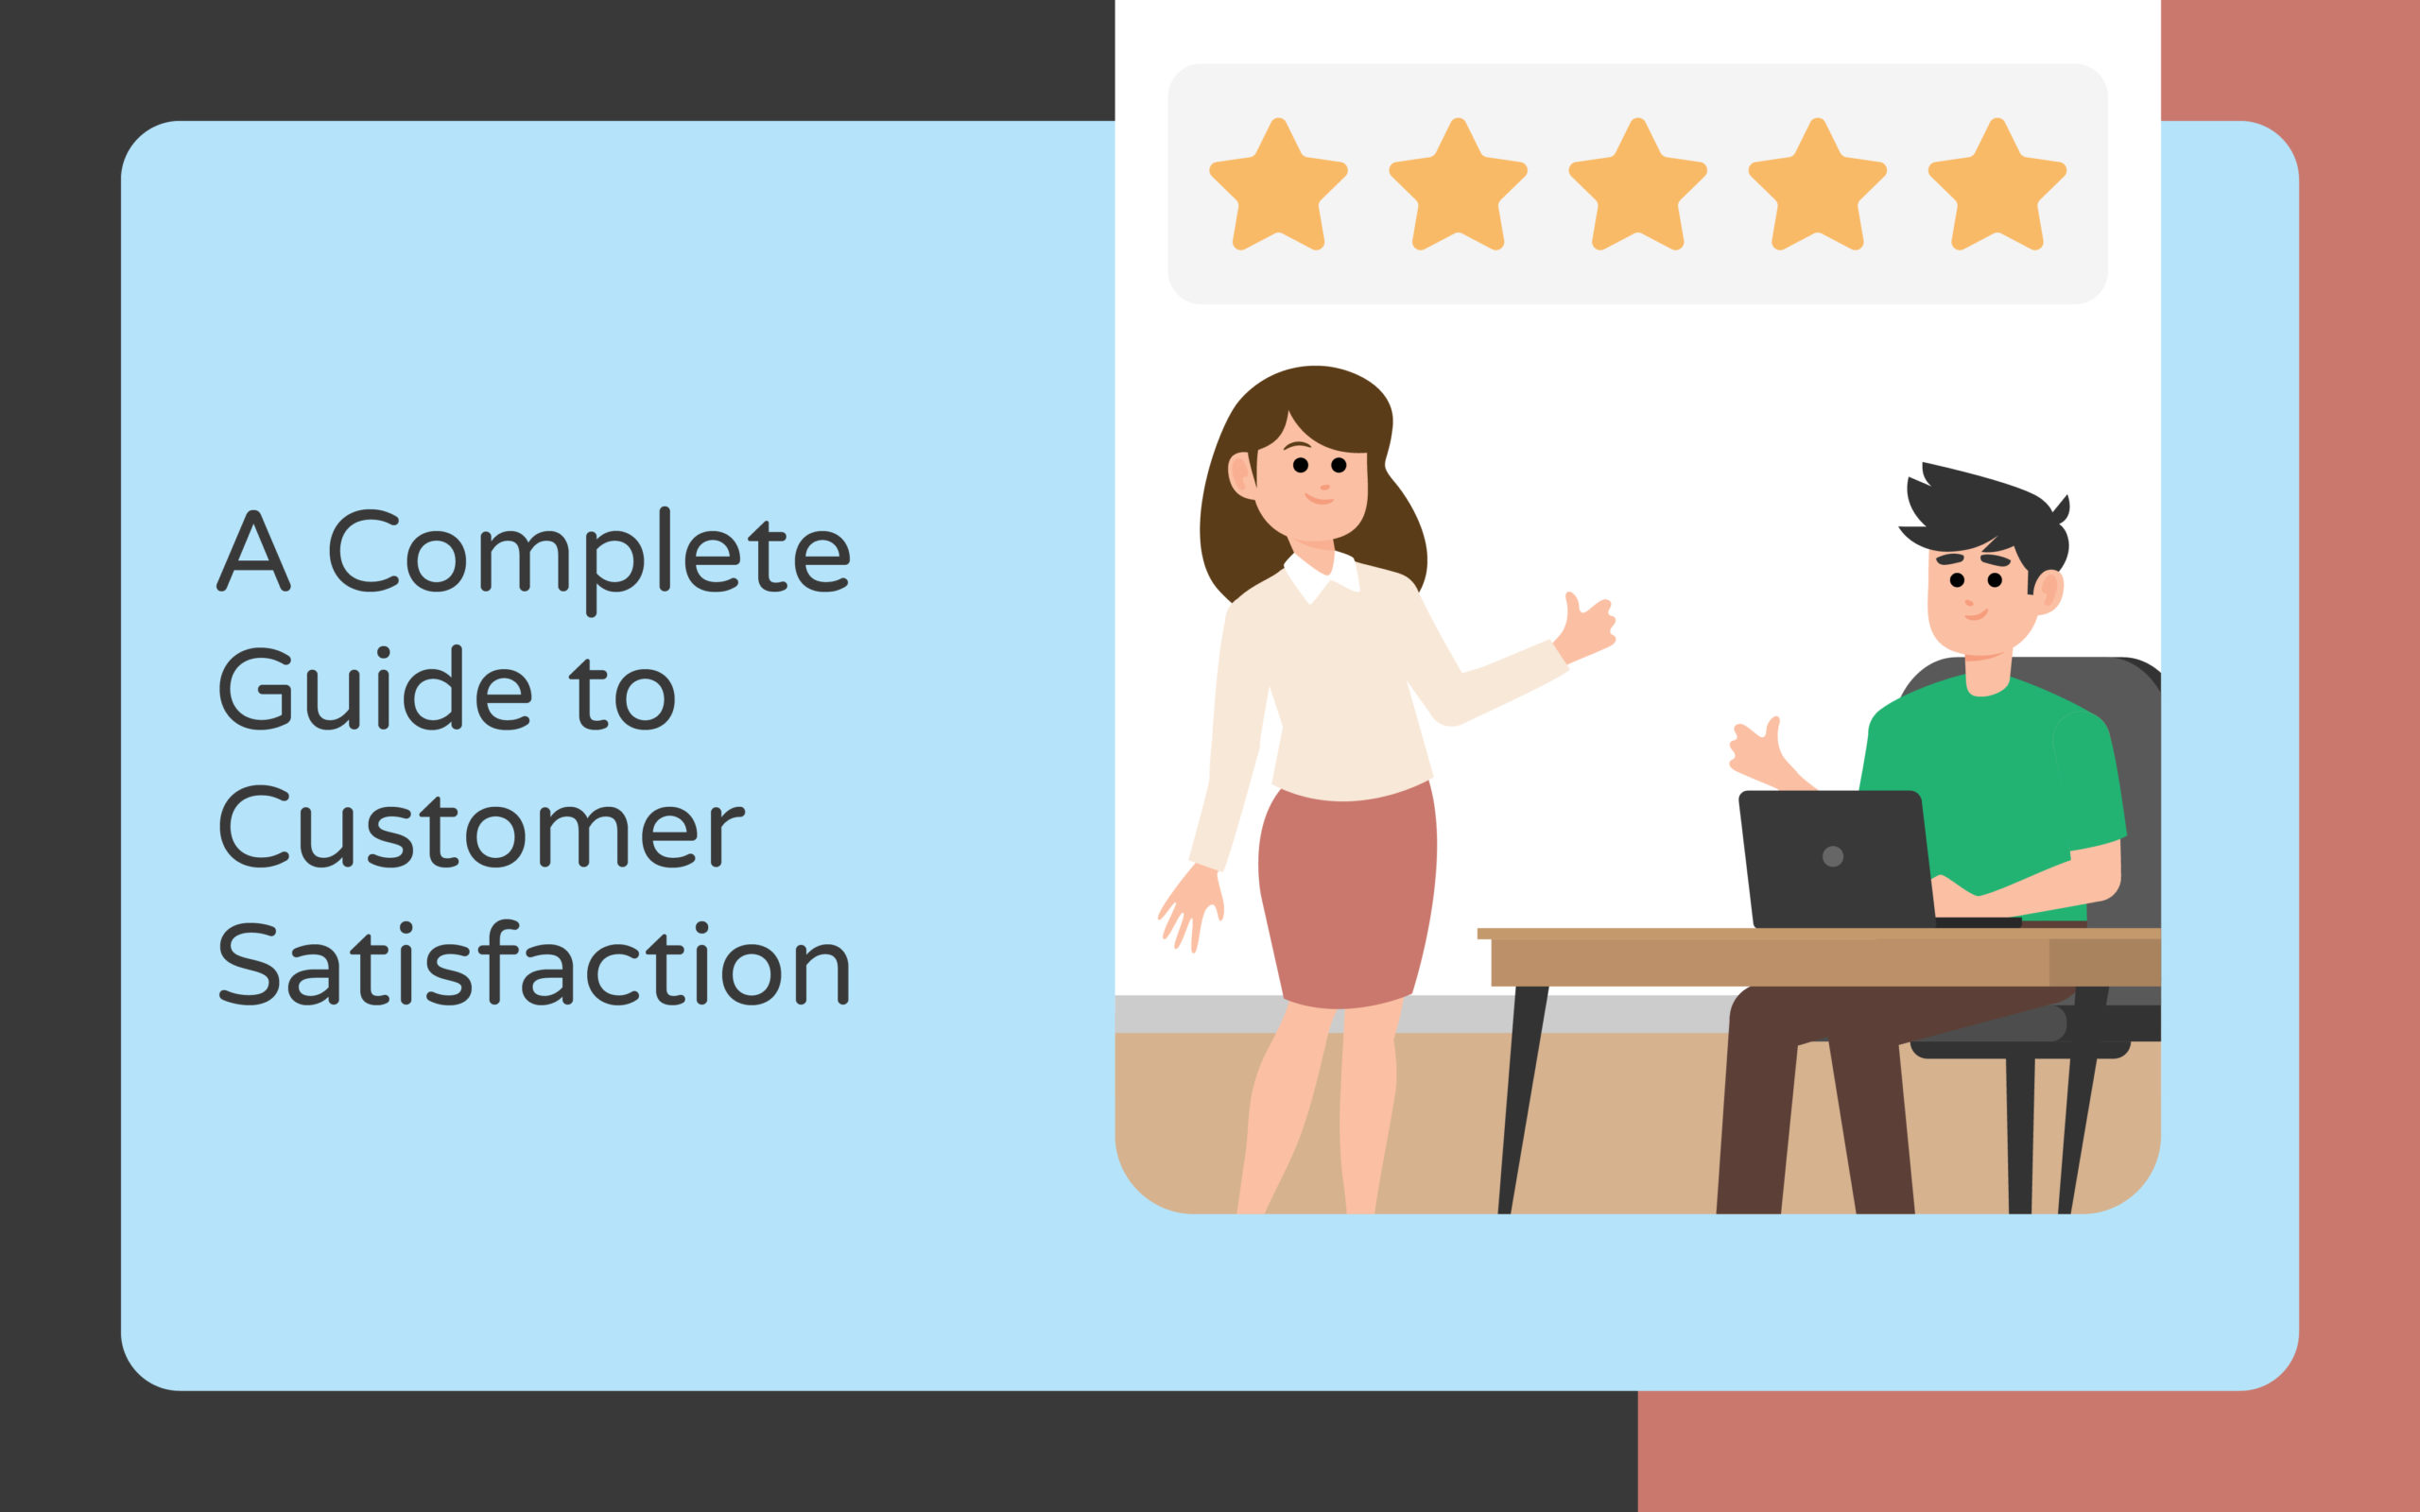 A Complete Guide to Customer Satisfaction